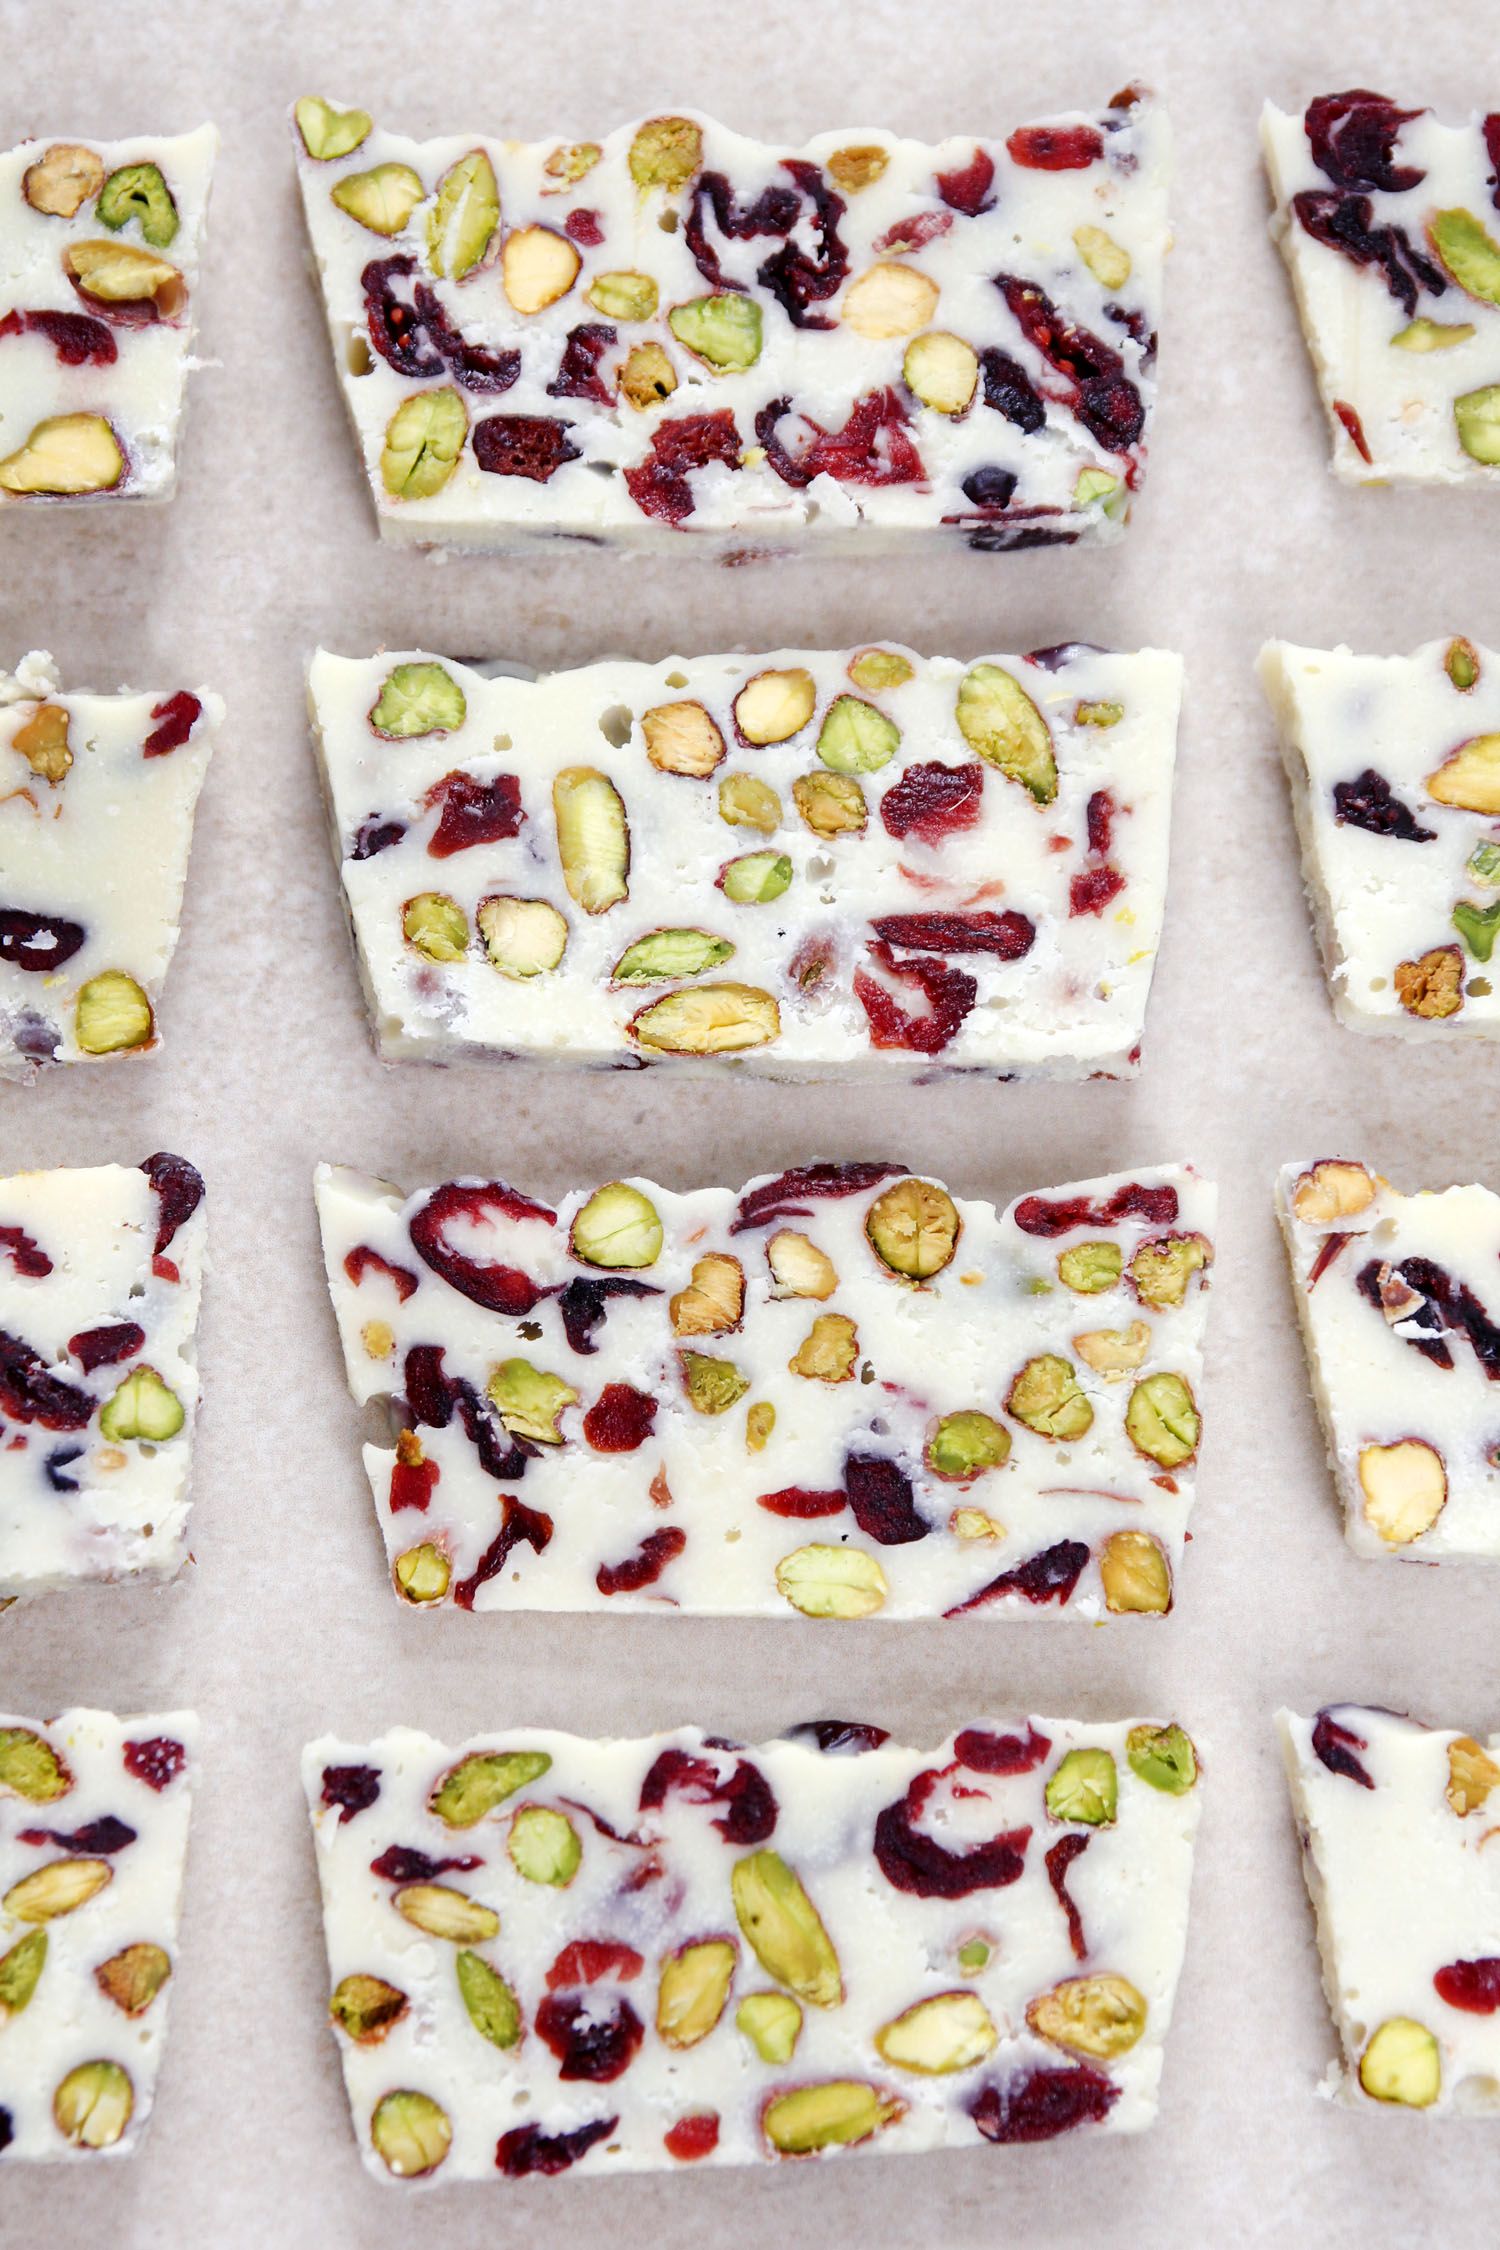 White Chocolate Fudge with Pistachio and Cranberry